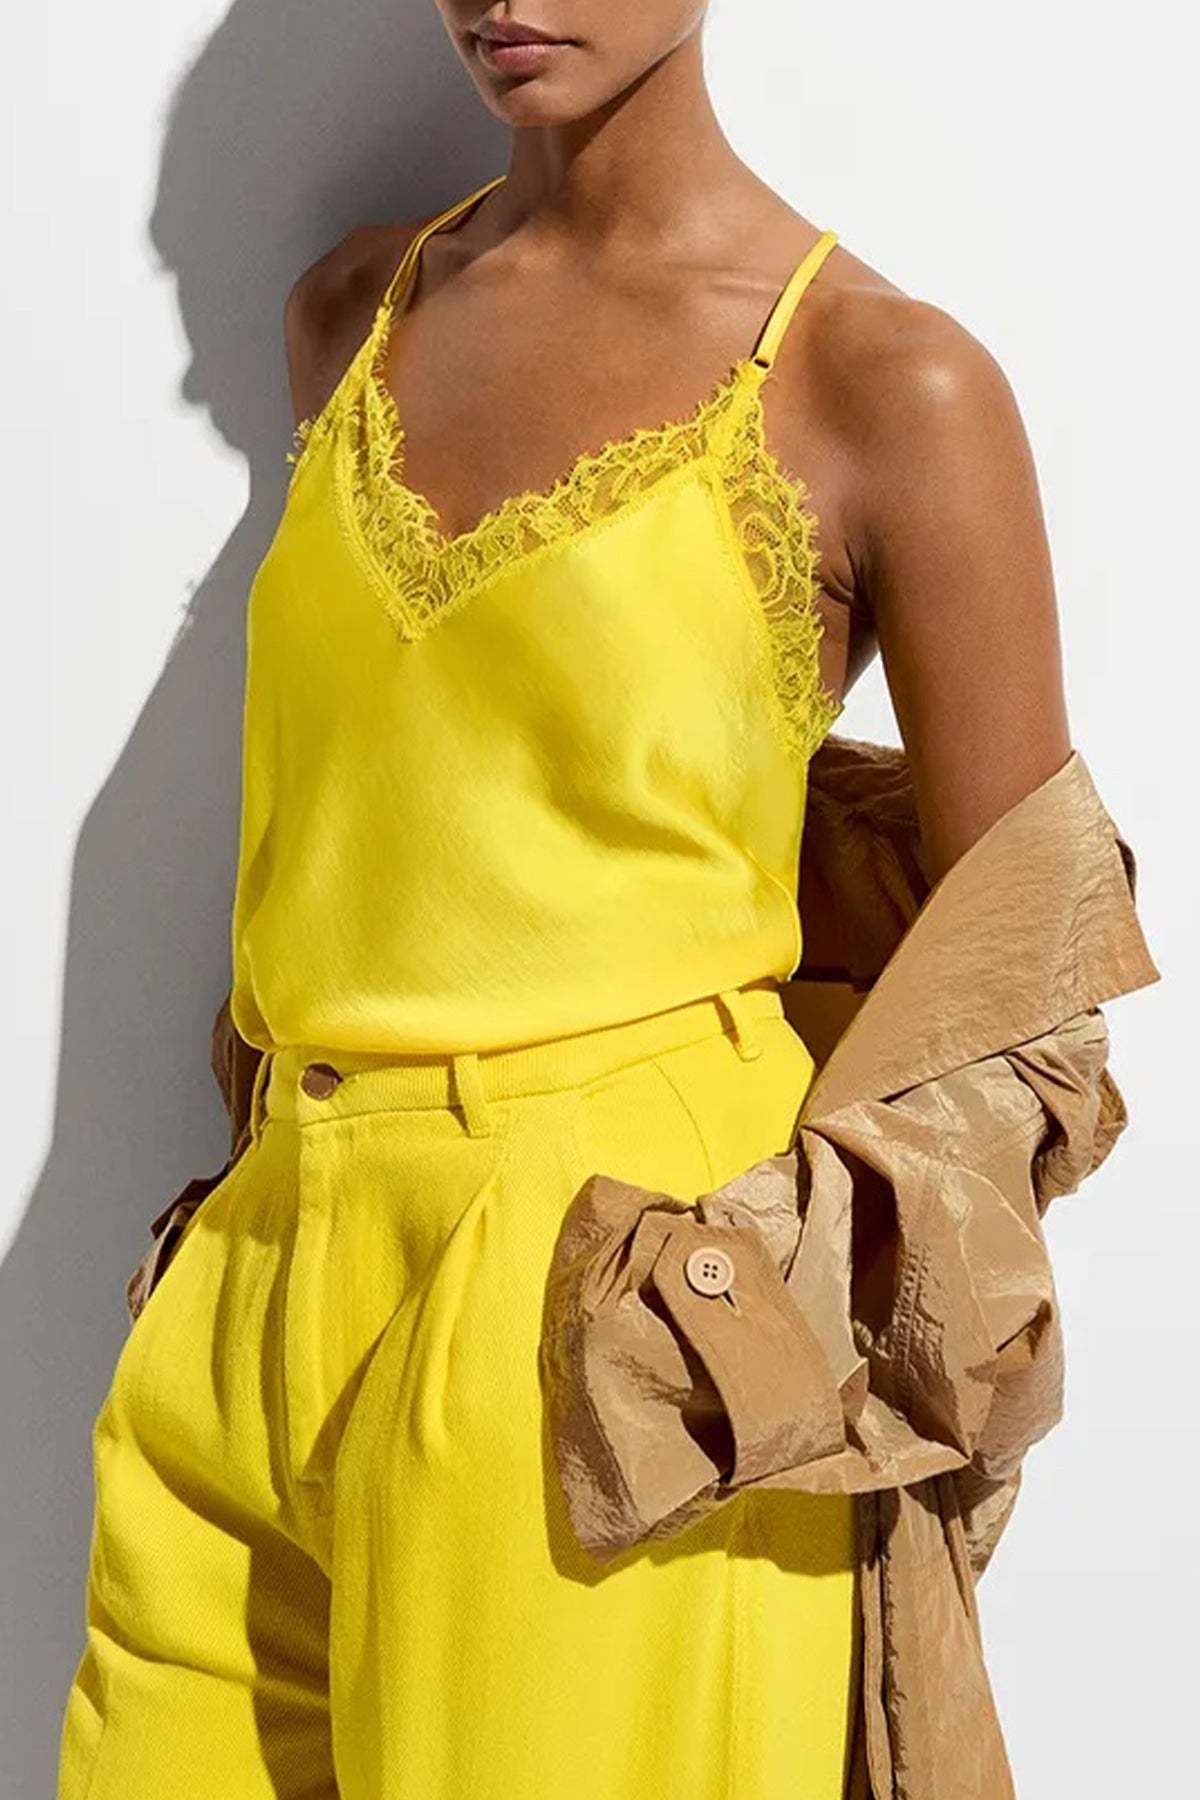 Fang Lace - Trimmed Camisole in Yellow - shop - olivia.com